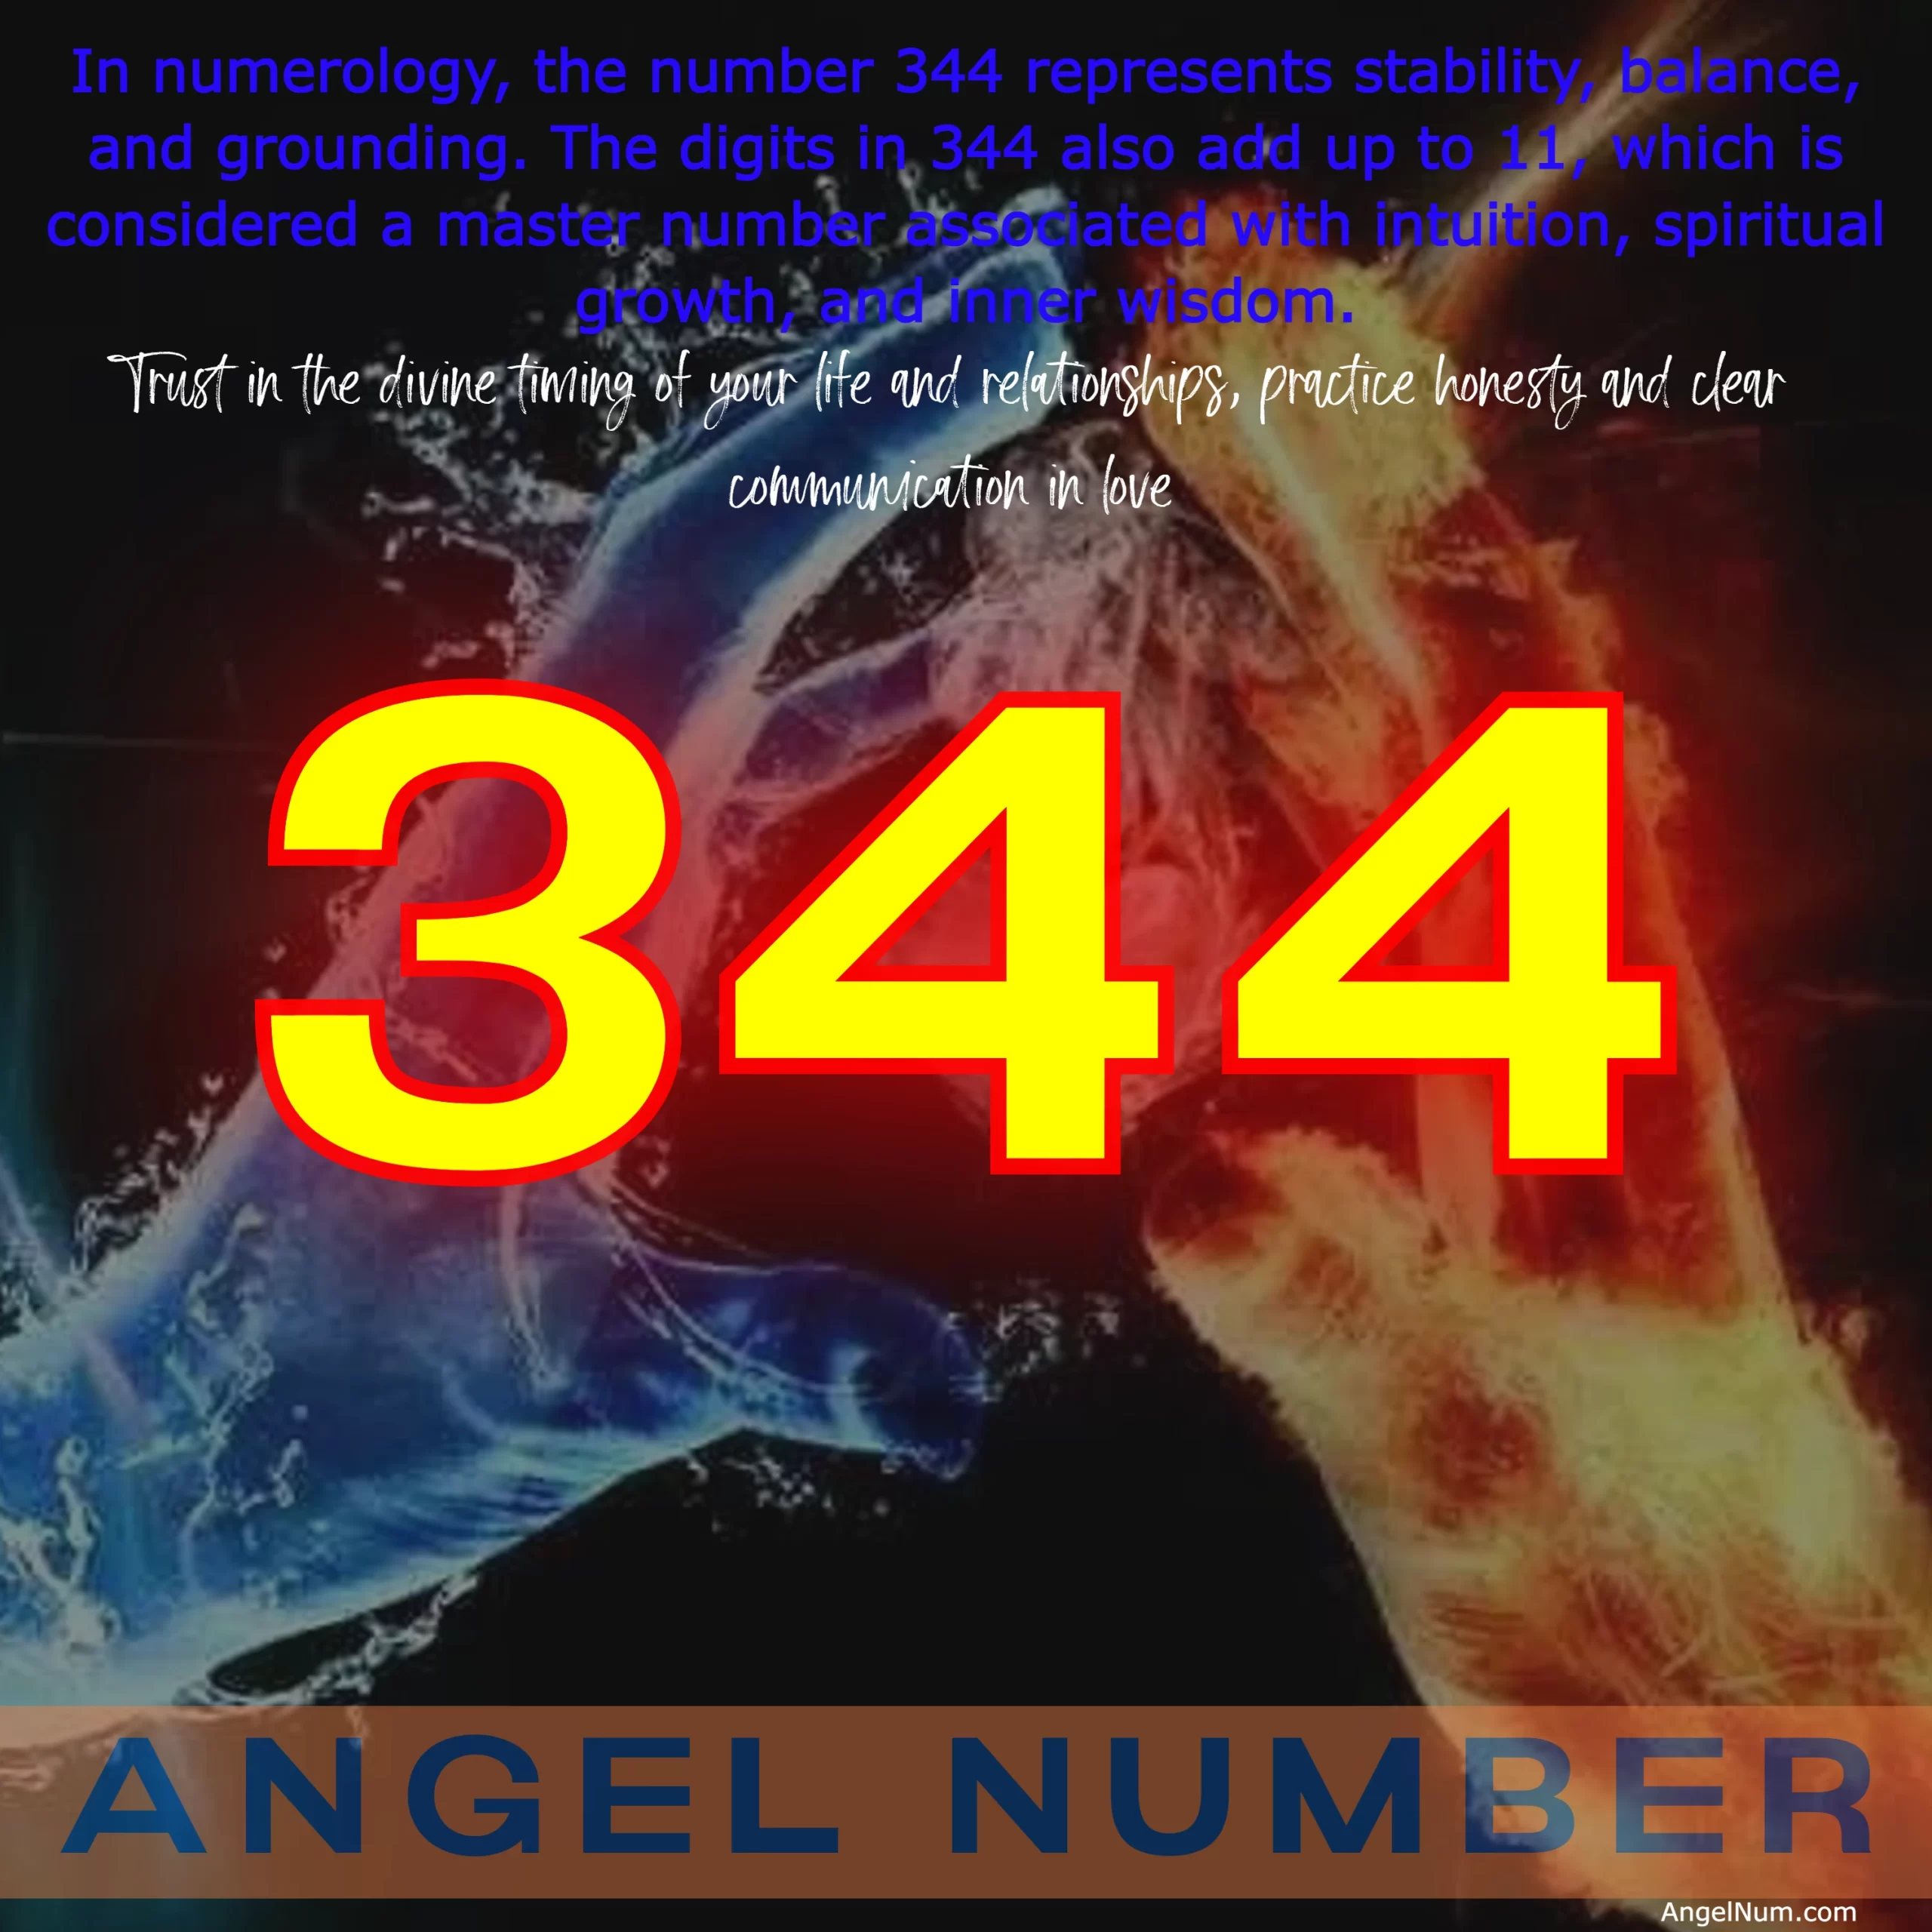 Angel Number 344: Trust in Divine Timing and Communication in Love